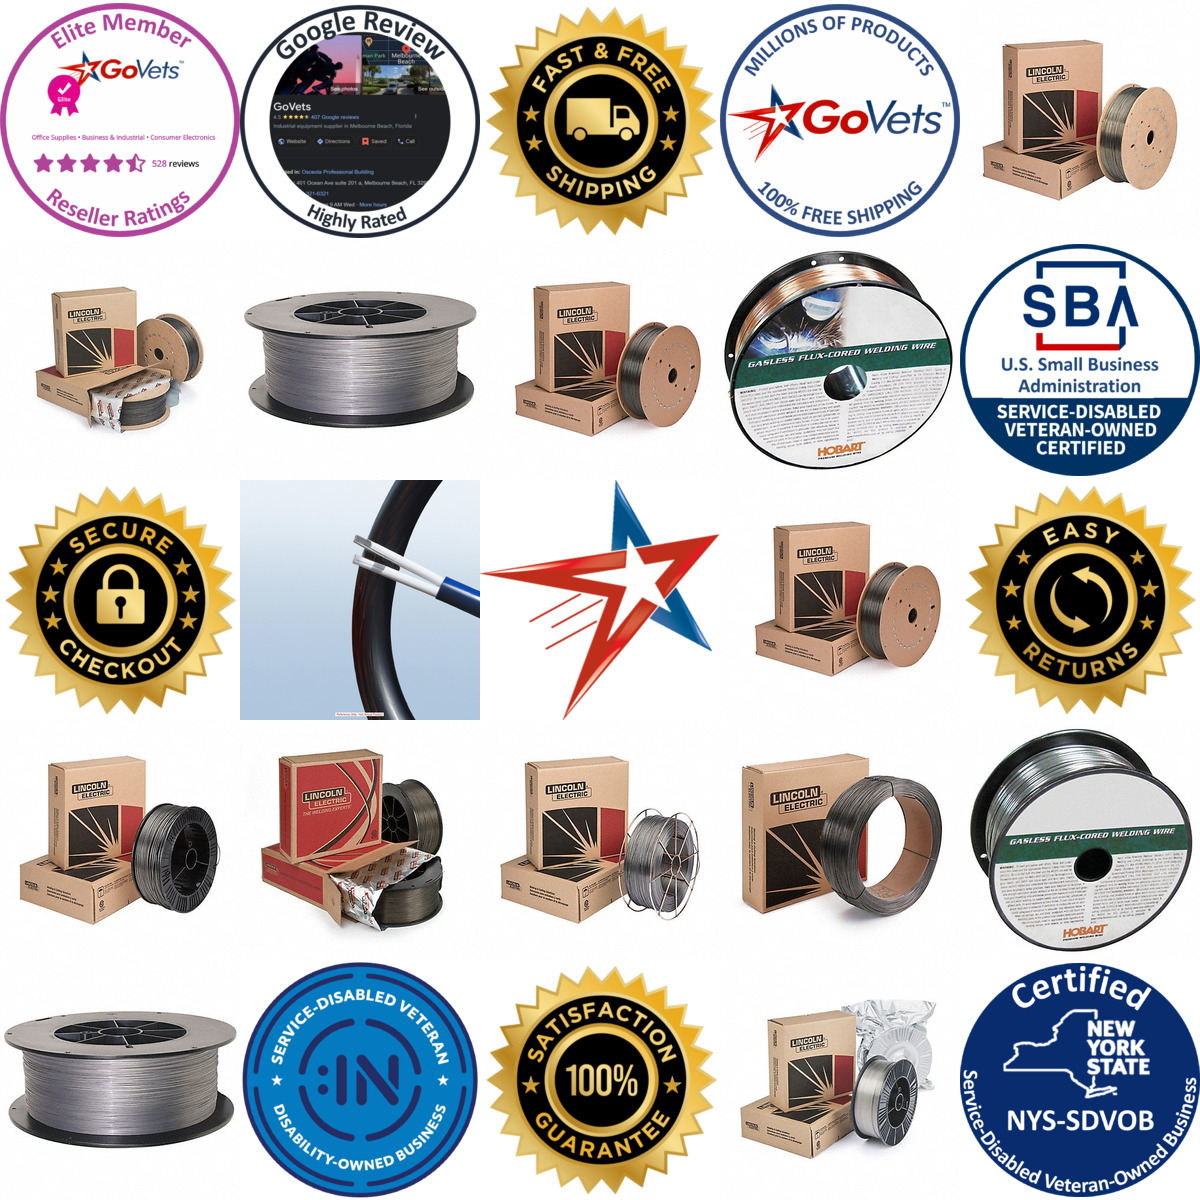 A selection of Flux Cored Welding Wire products on GoVets